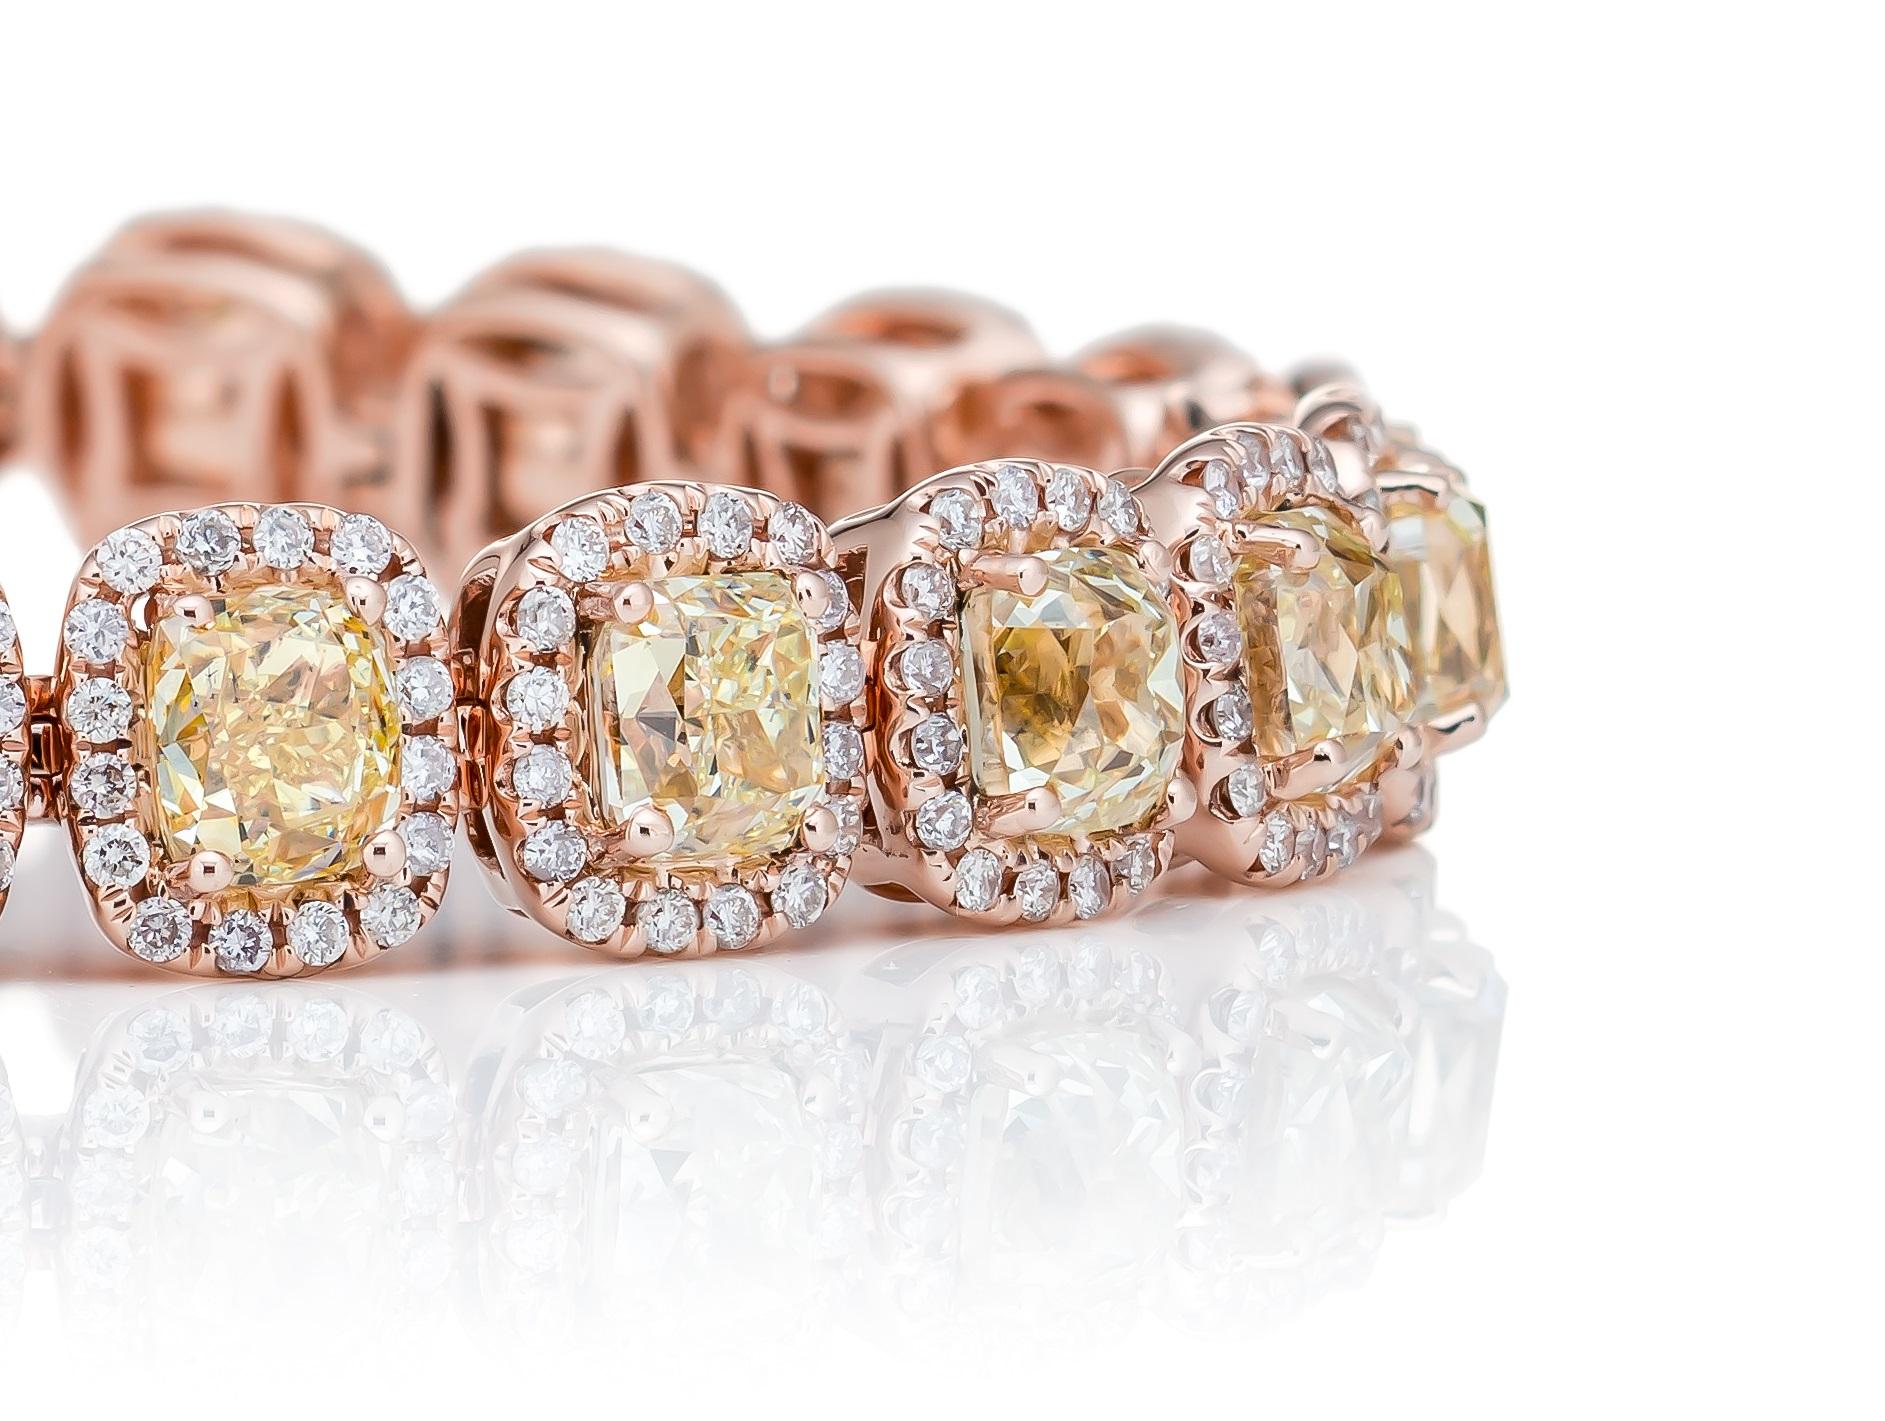 AS29 by Audrey Savransky
18kt pink and yellow gold with natural fancy light to yellow & white diamond bracelet.

Life isn't perfect but your jewellery can be! Crafted from 18kt pink and yellow gold, this diamond bracelet from AS29 can be love at